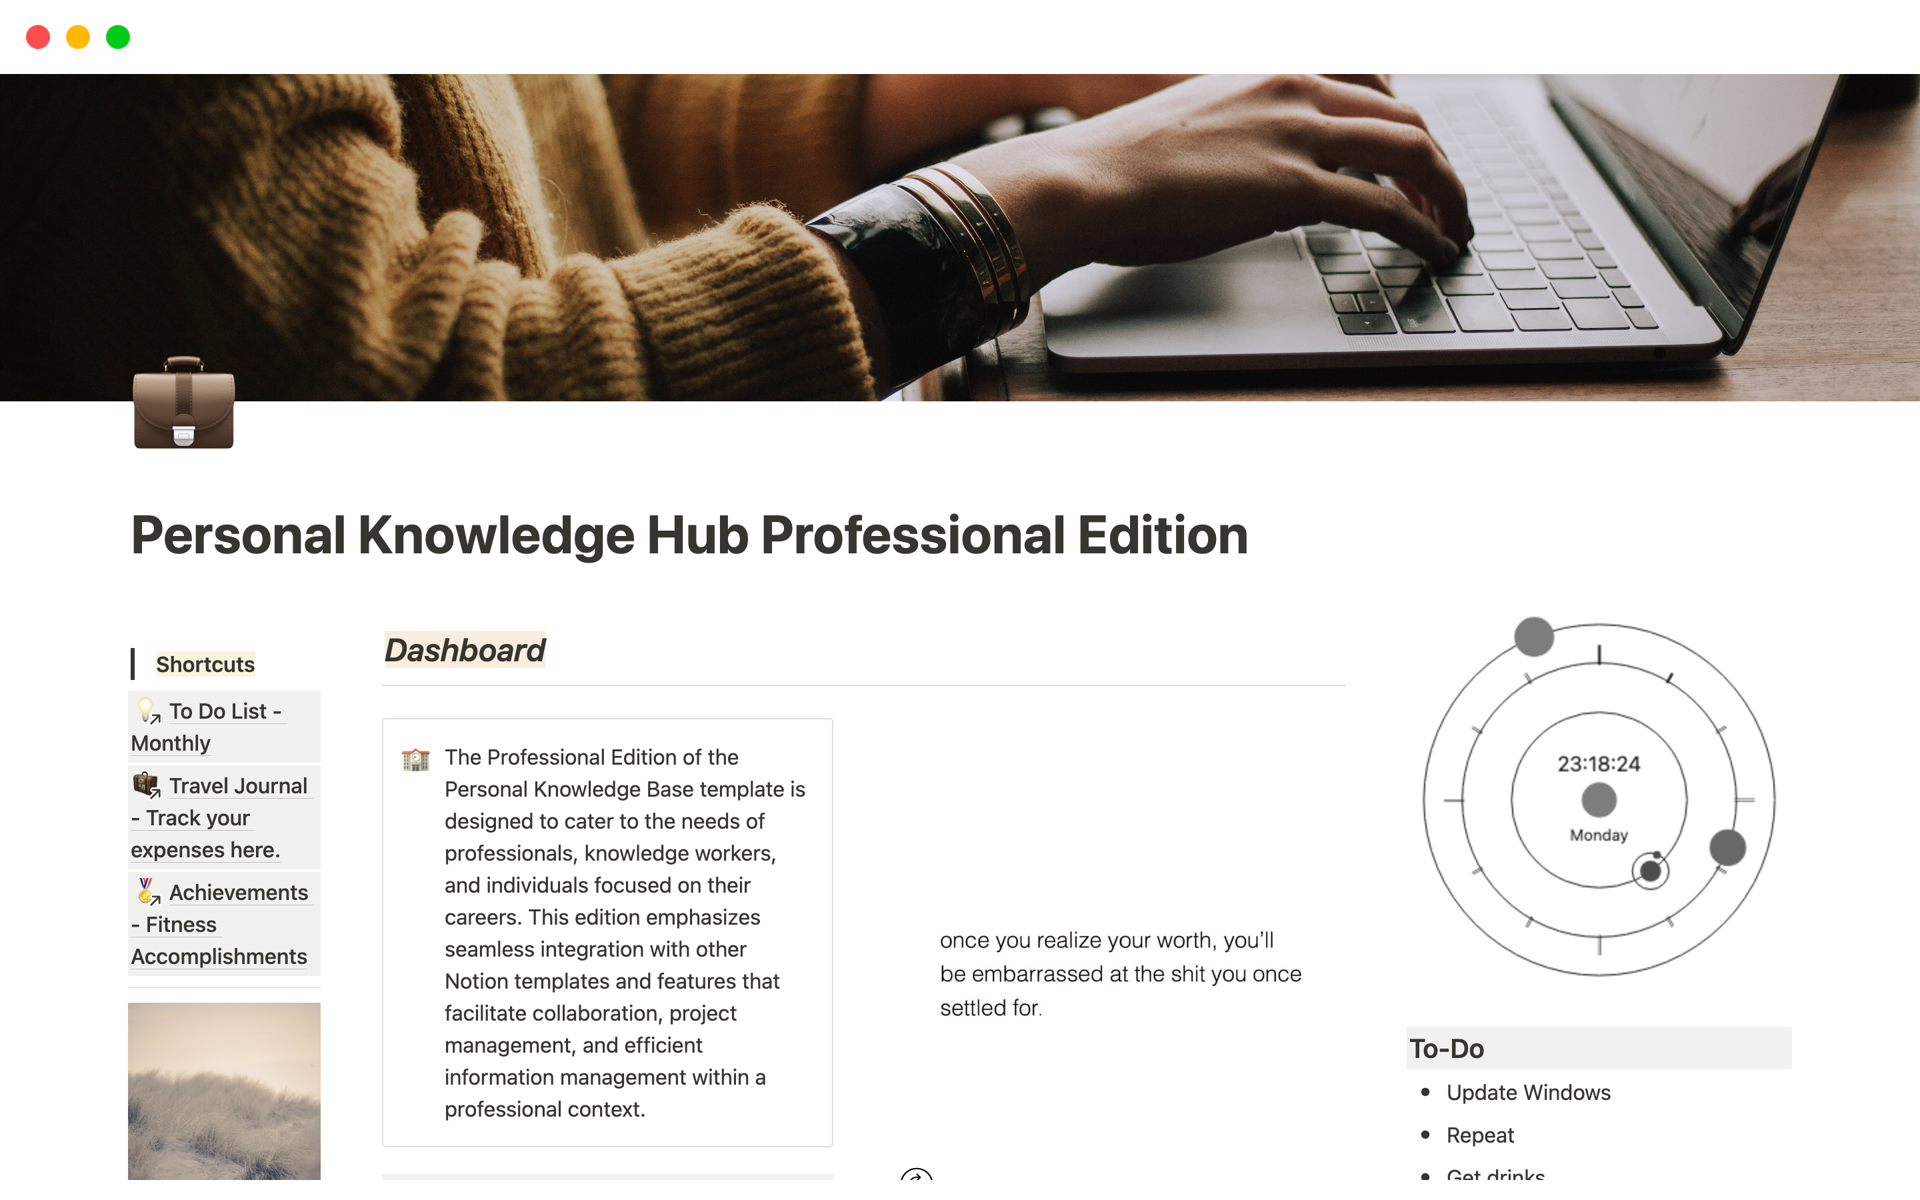 The Professional Edition of the Personal Knowledge Base template is designed to cater to the needs of professionals, knowledge workers, and individuals focused on their careers. 